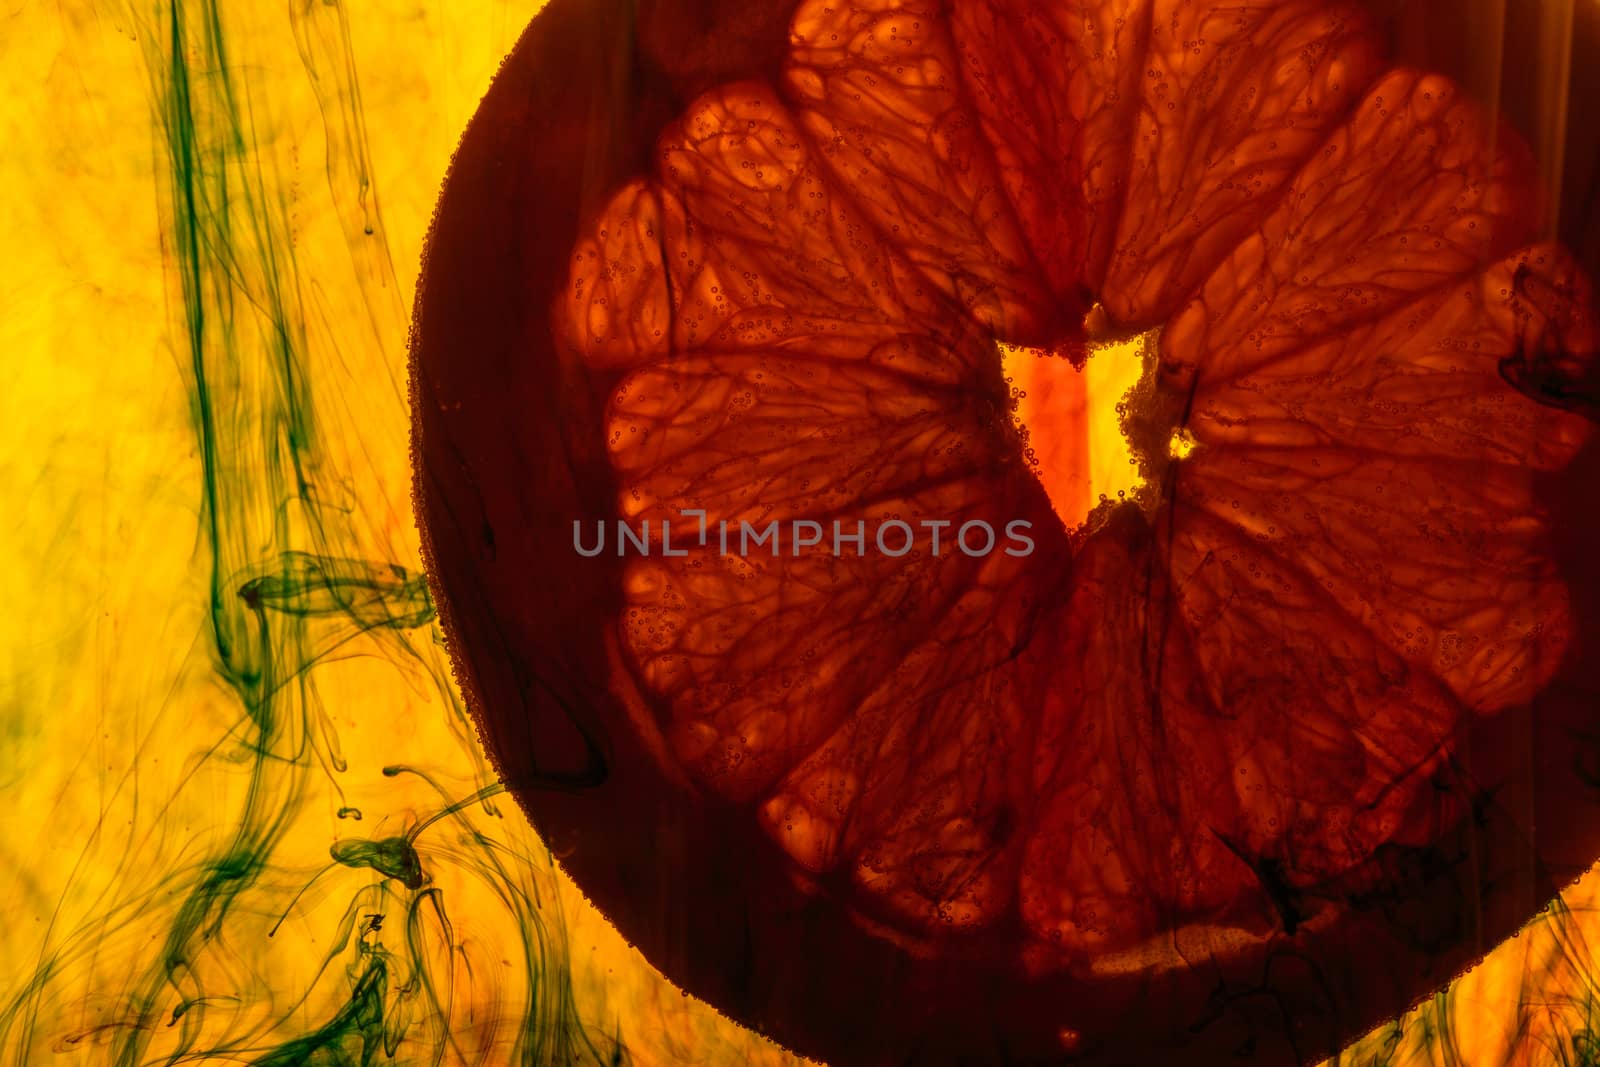 close up of a grapefruit slice in water